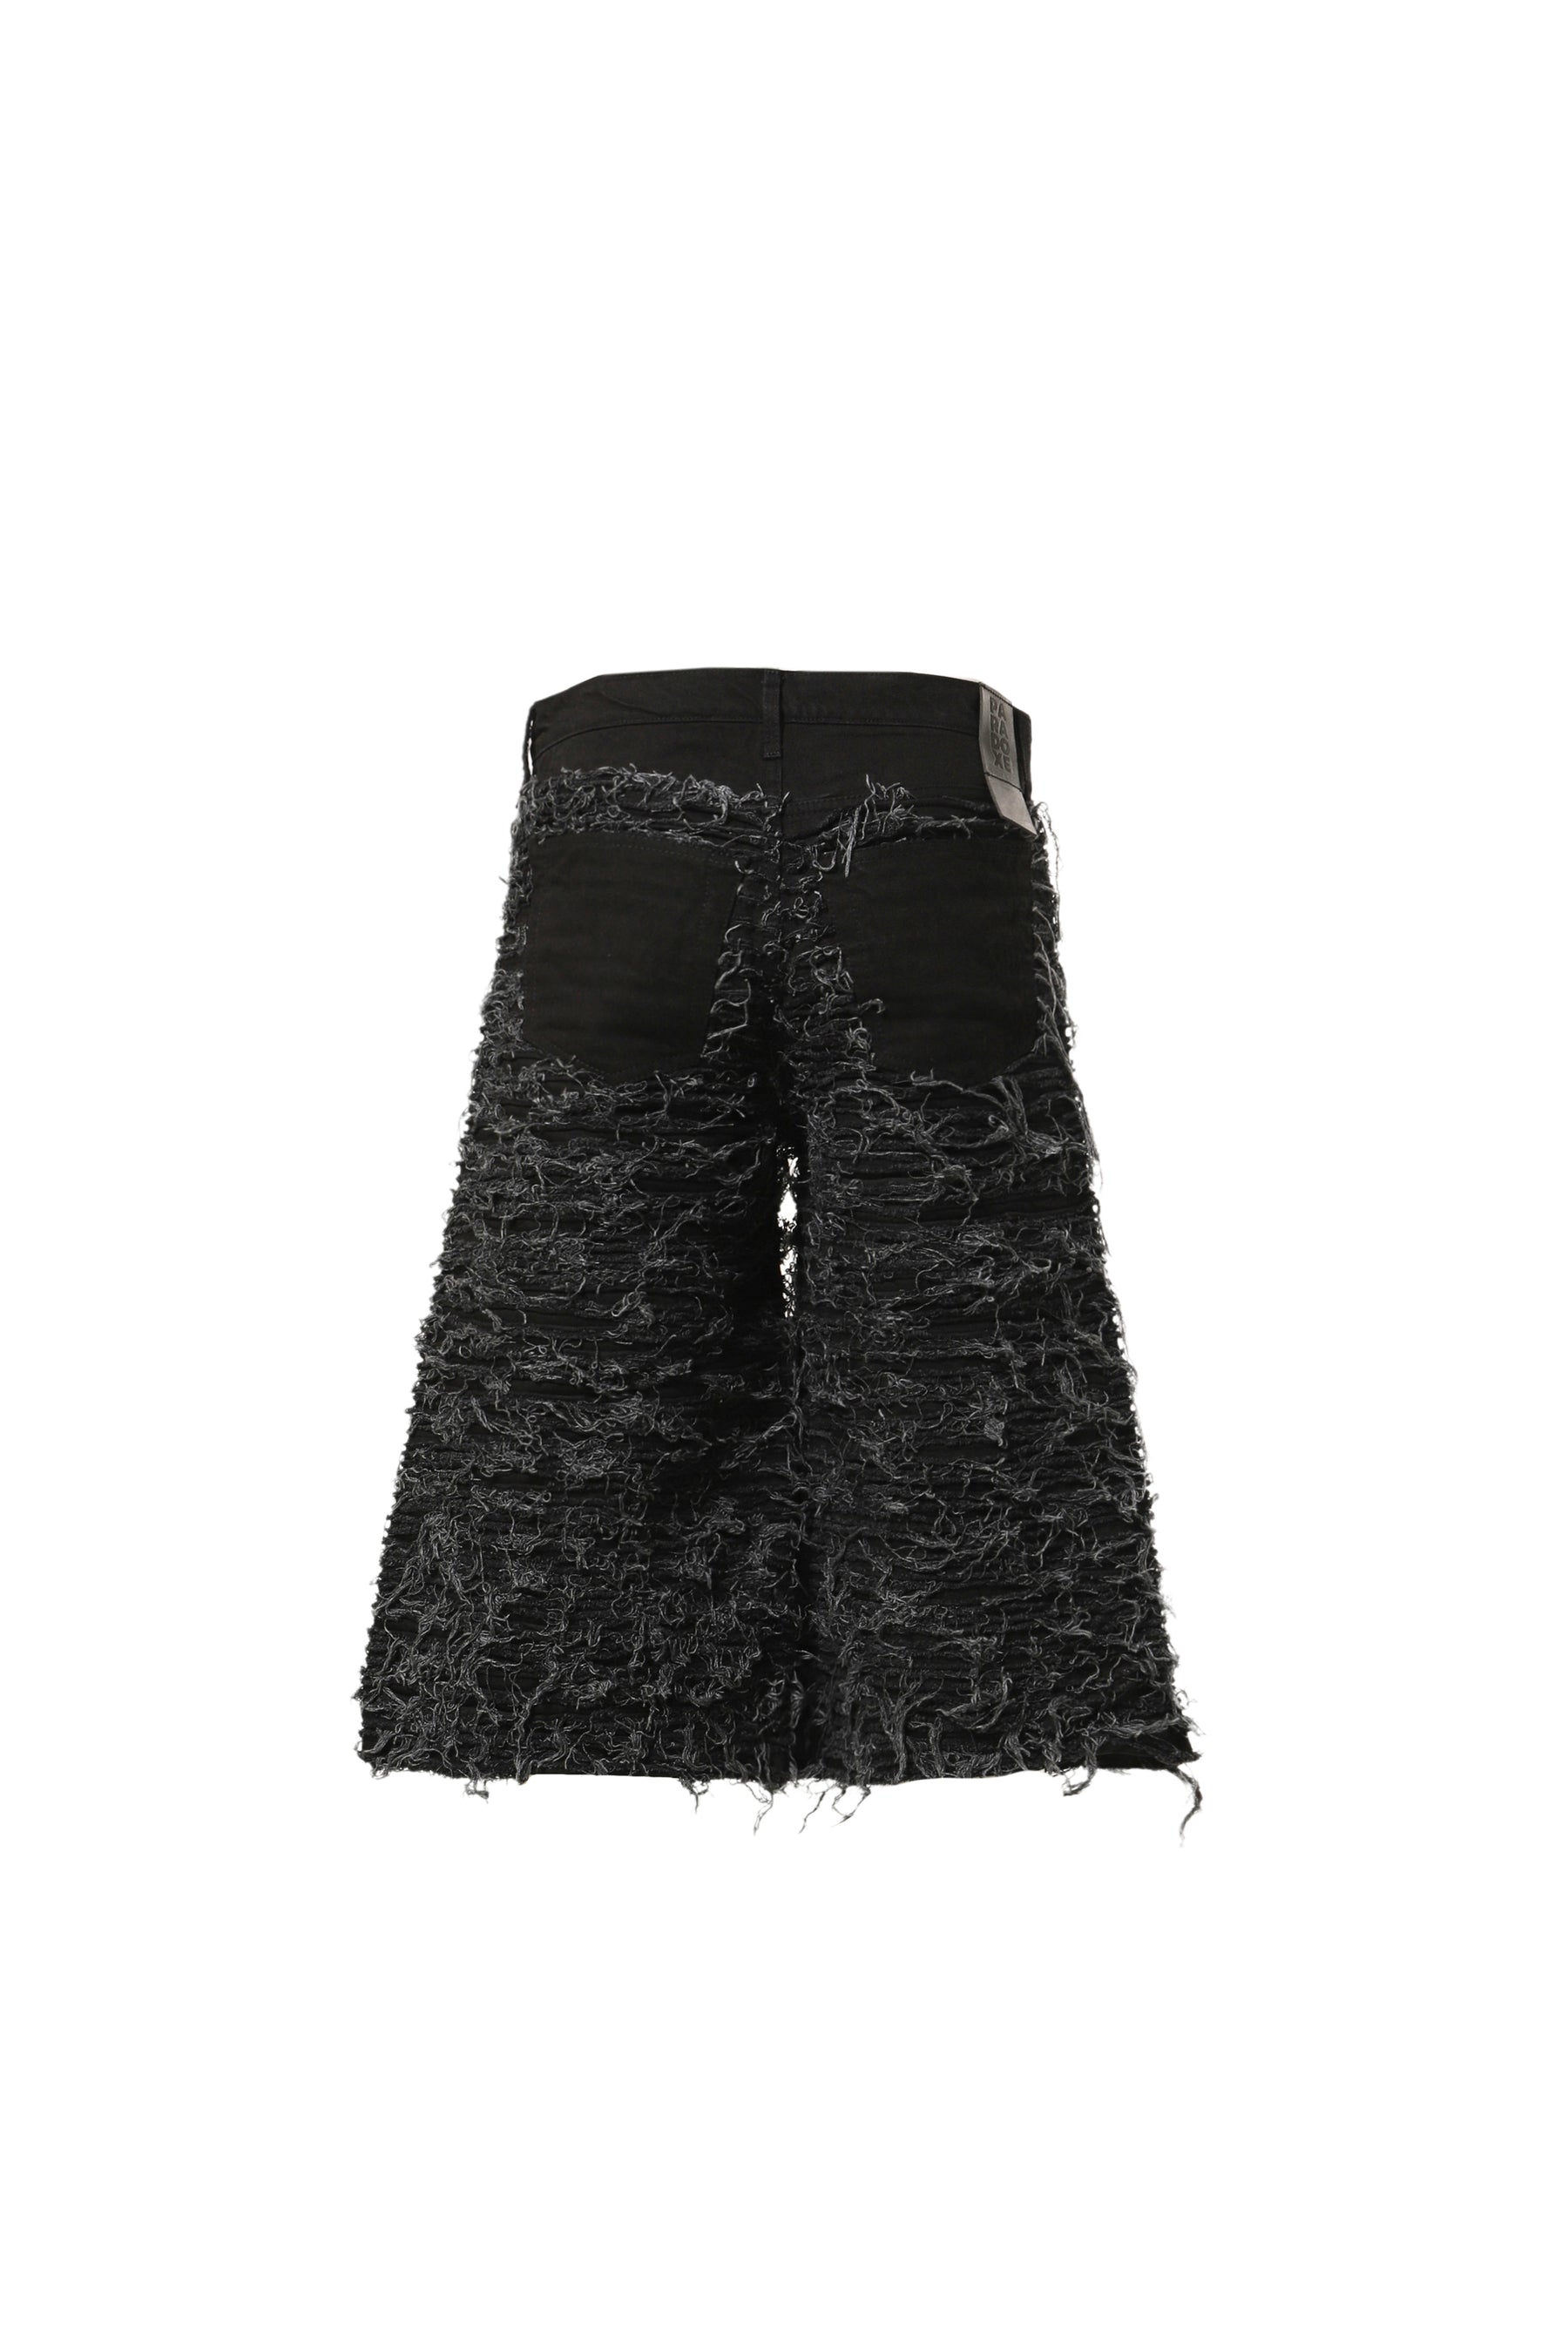 BAGGY ABYSS SHORTS / BLK